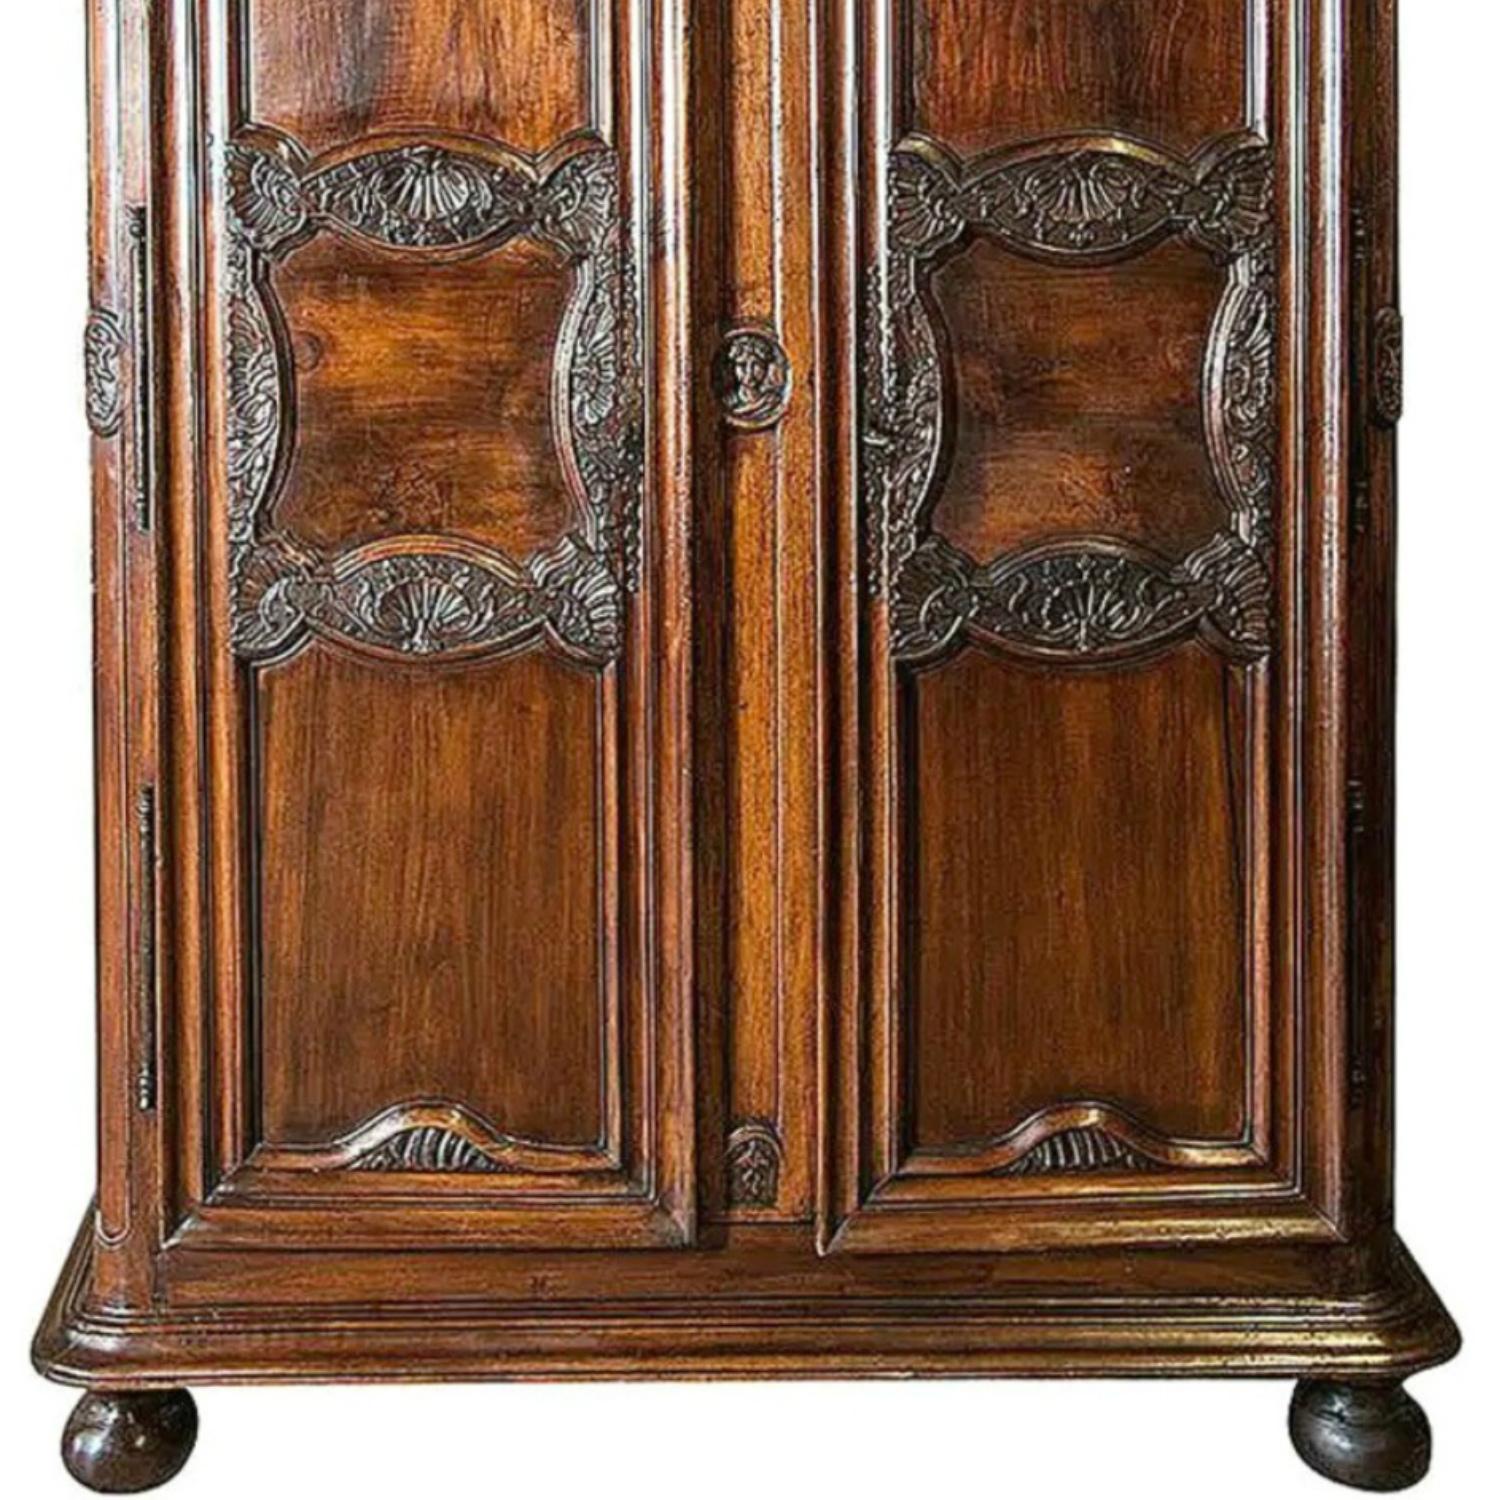 Exceptional 18th Century French Régence Period Walnut Chateau Lyonnaise Armoire For Sale 1